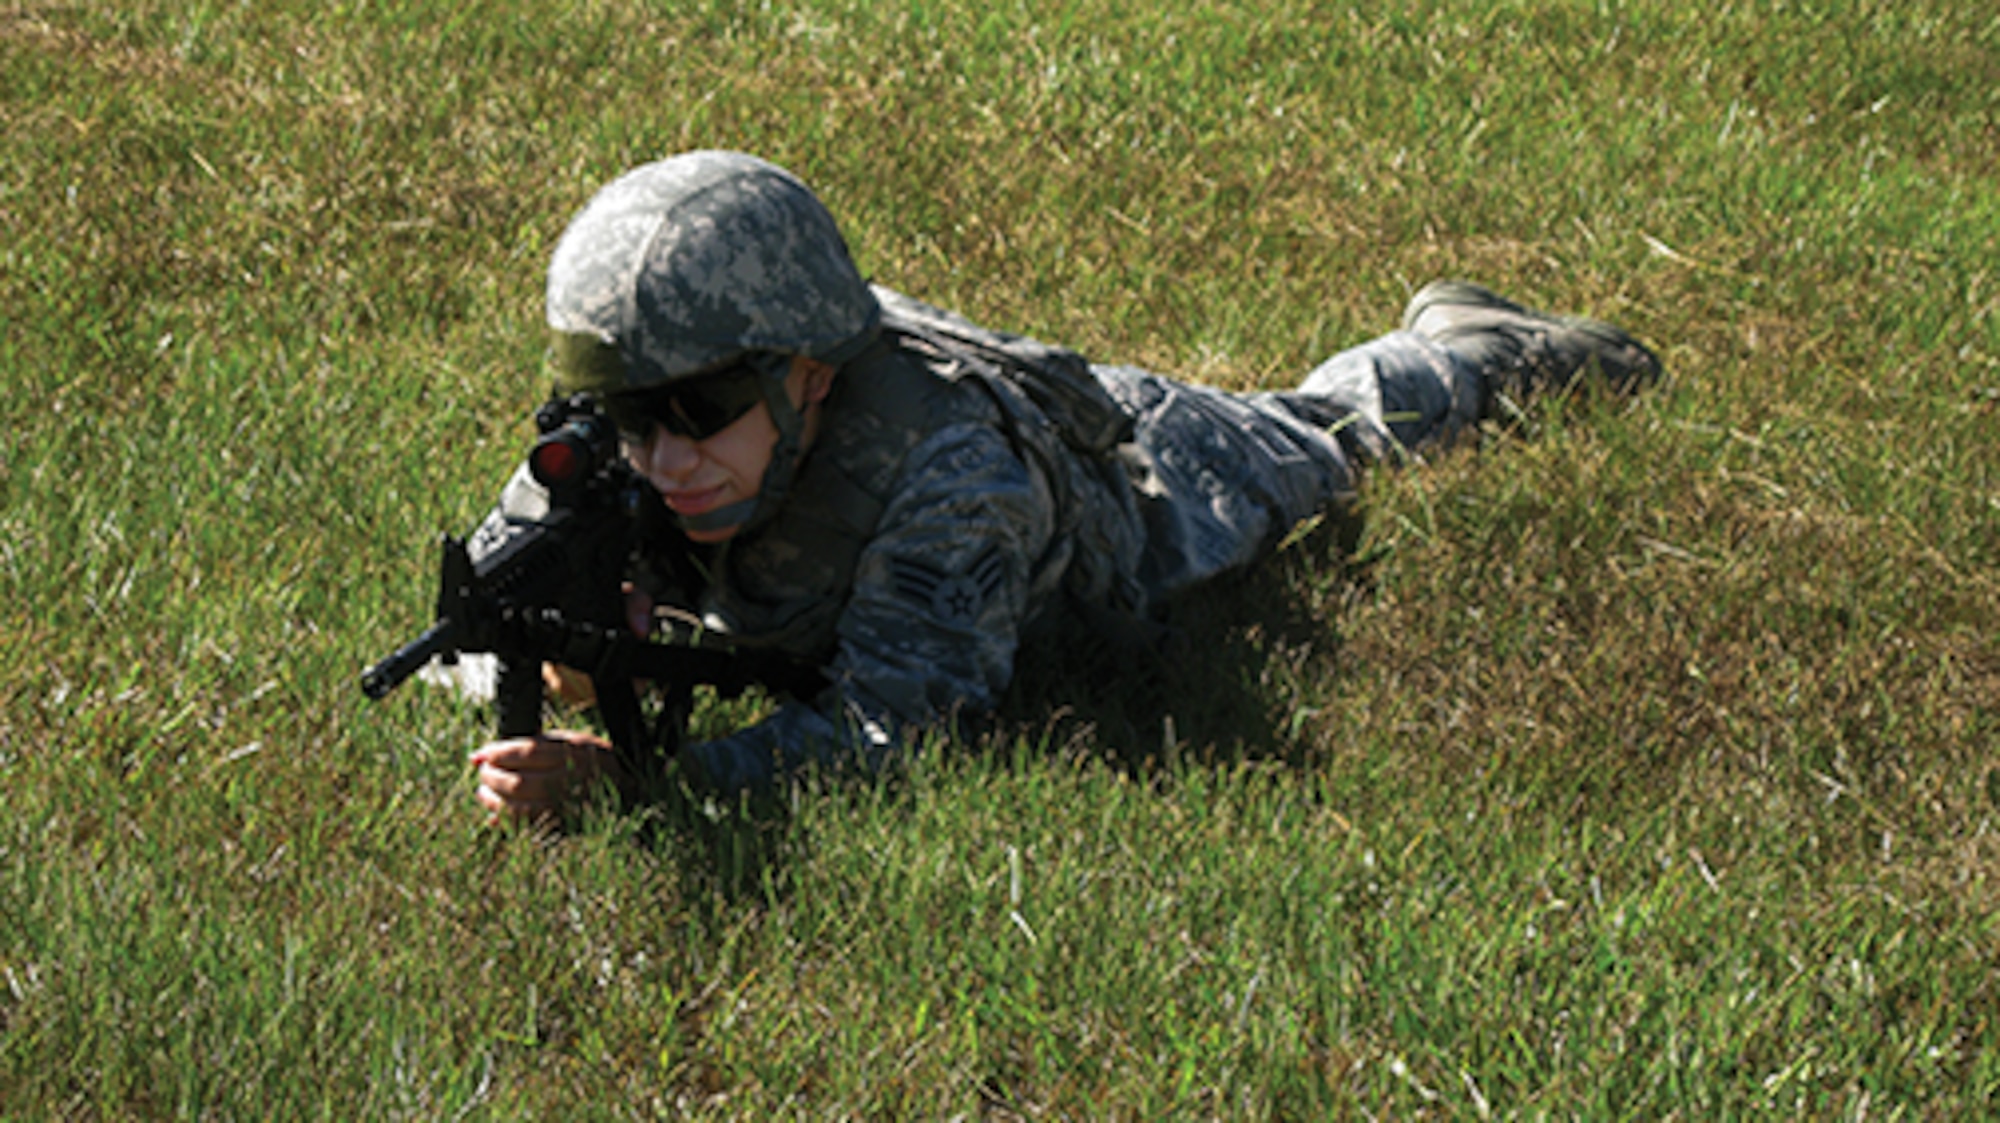 A member of the 908th SFS engages a target downrange.